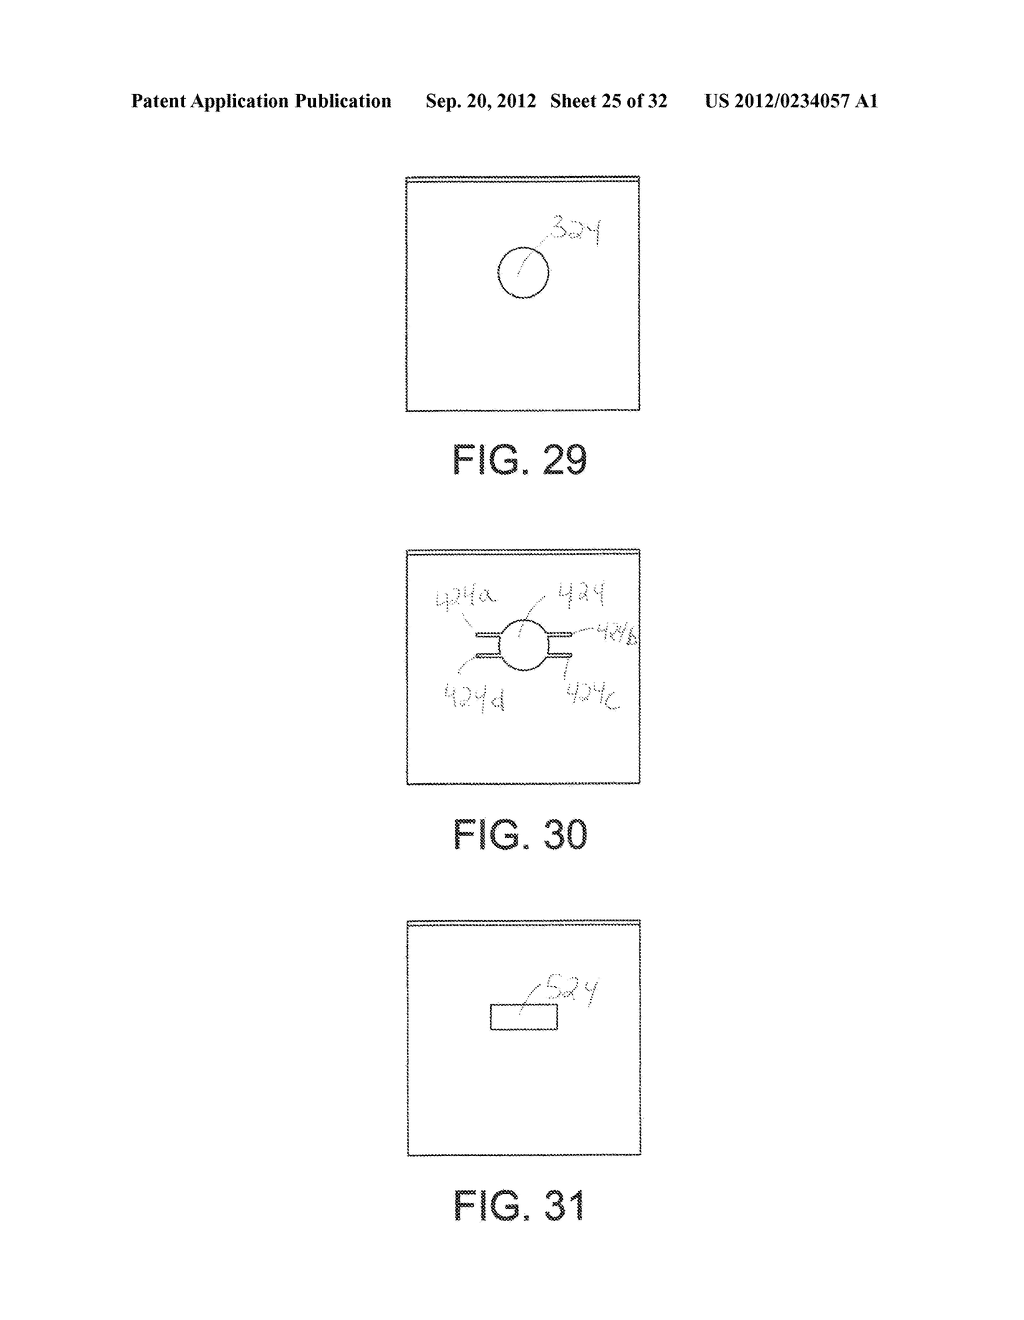 Anti-Theft Ring Assembly And Method Of Using the Same - diagram, schematic, and image 26